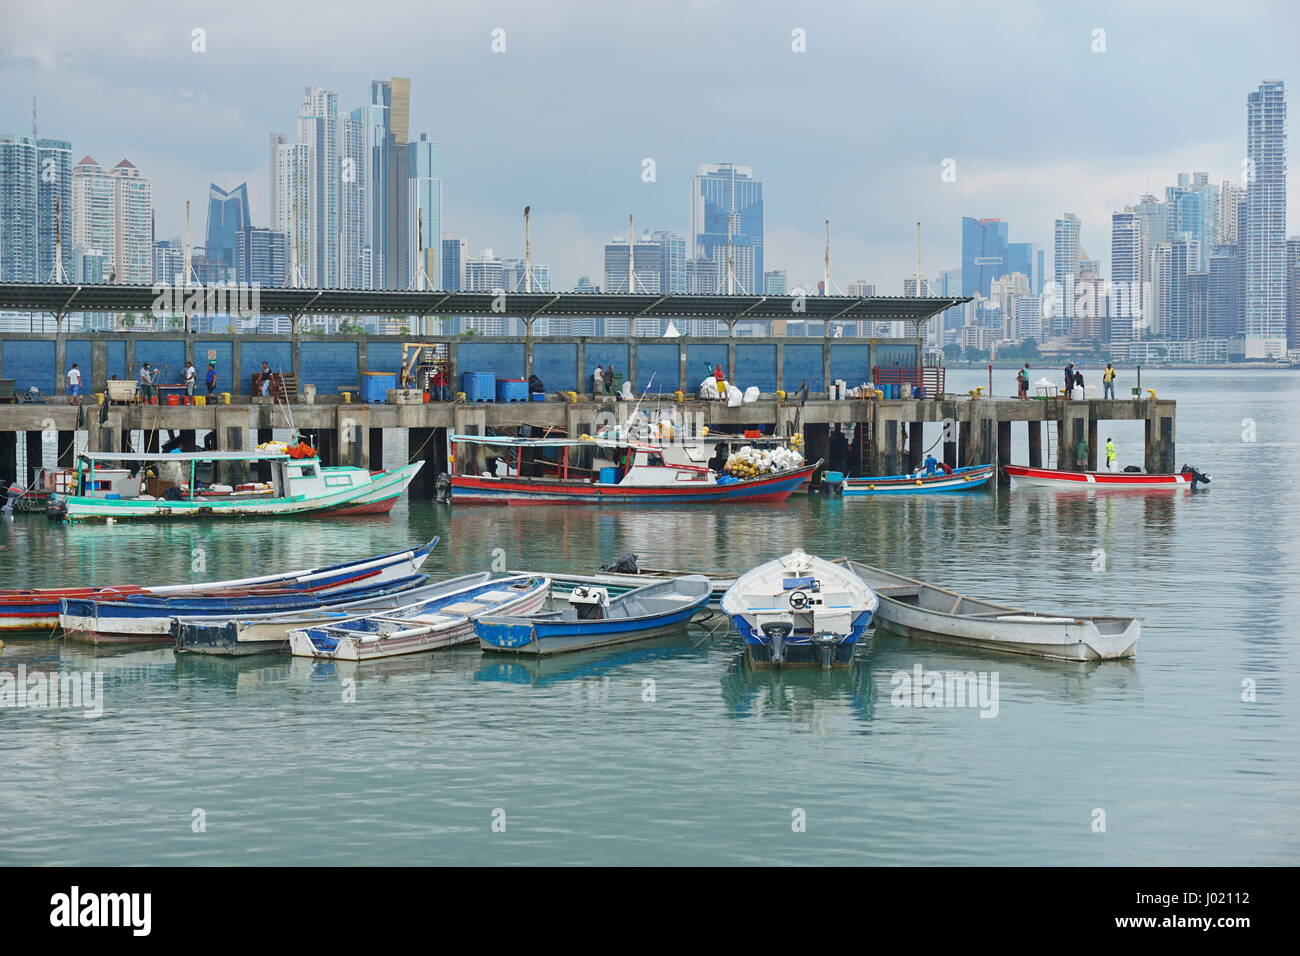 Wharf and boats of the fishing harbor of Panama city with skyscrapers in background, Pacific coast, Panama, Central America Stock Photo